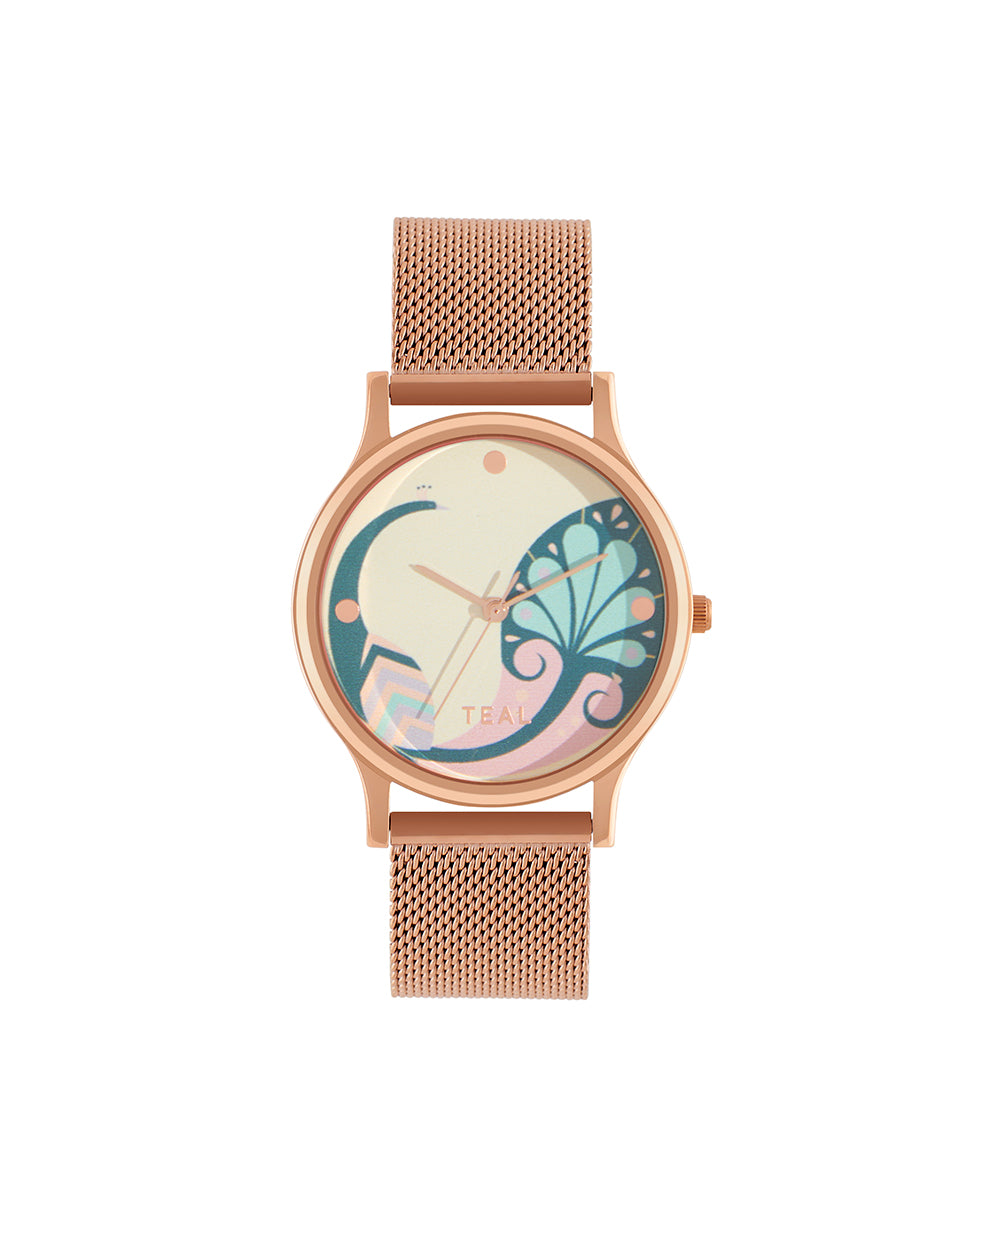 Teal By Chumbak |  Urban feathers Watch - Metal Mesh Strap